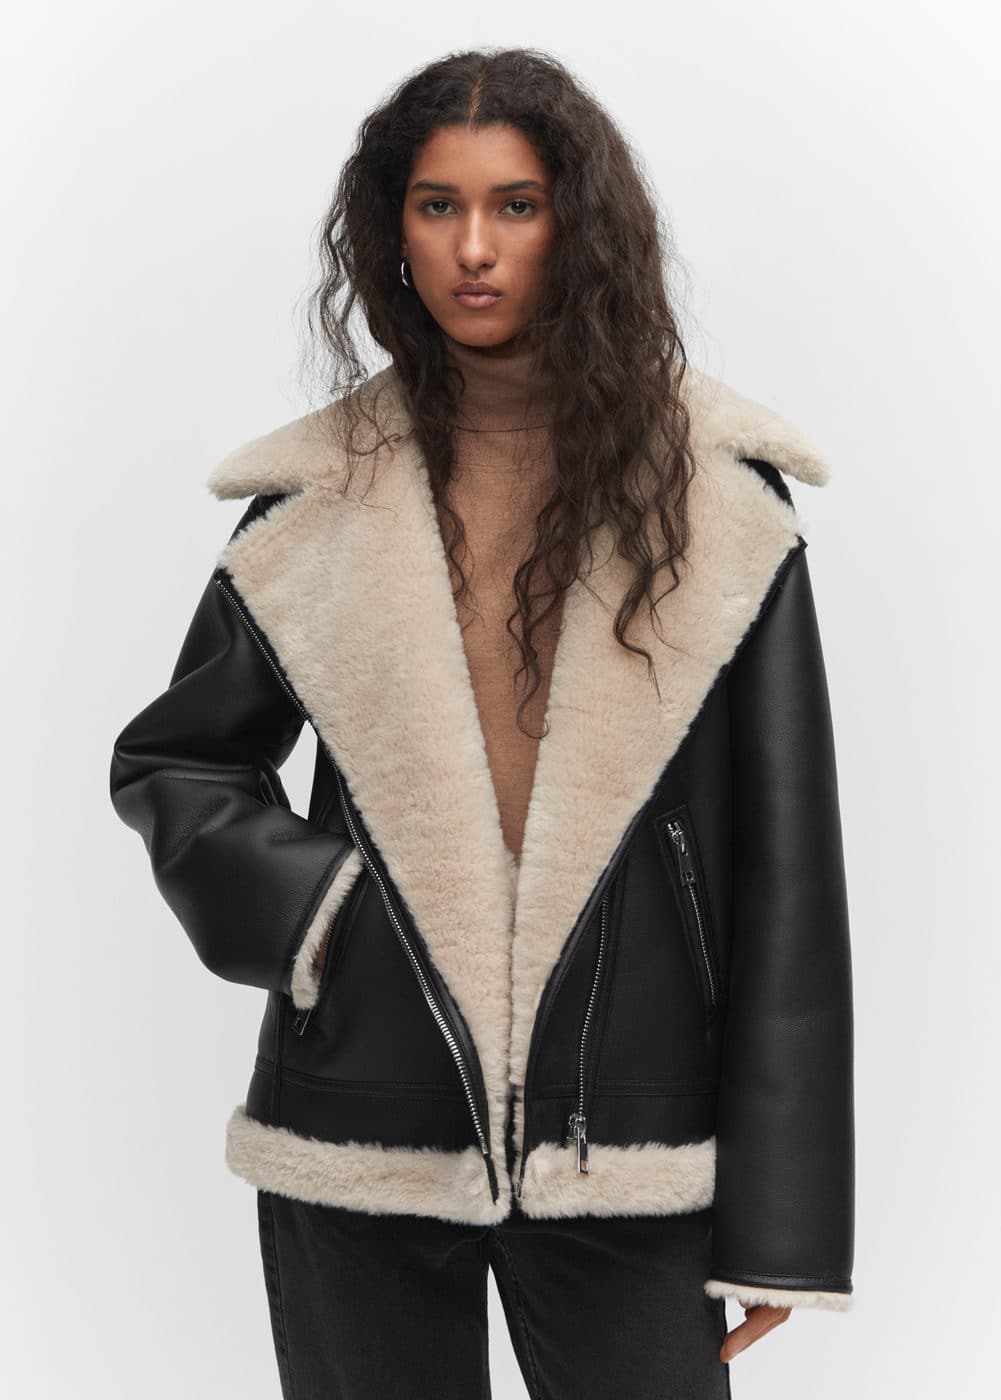 Mango's Sell-Out Faux-Shearling Jacket Is Back In Stock | Who What Wear